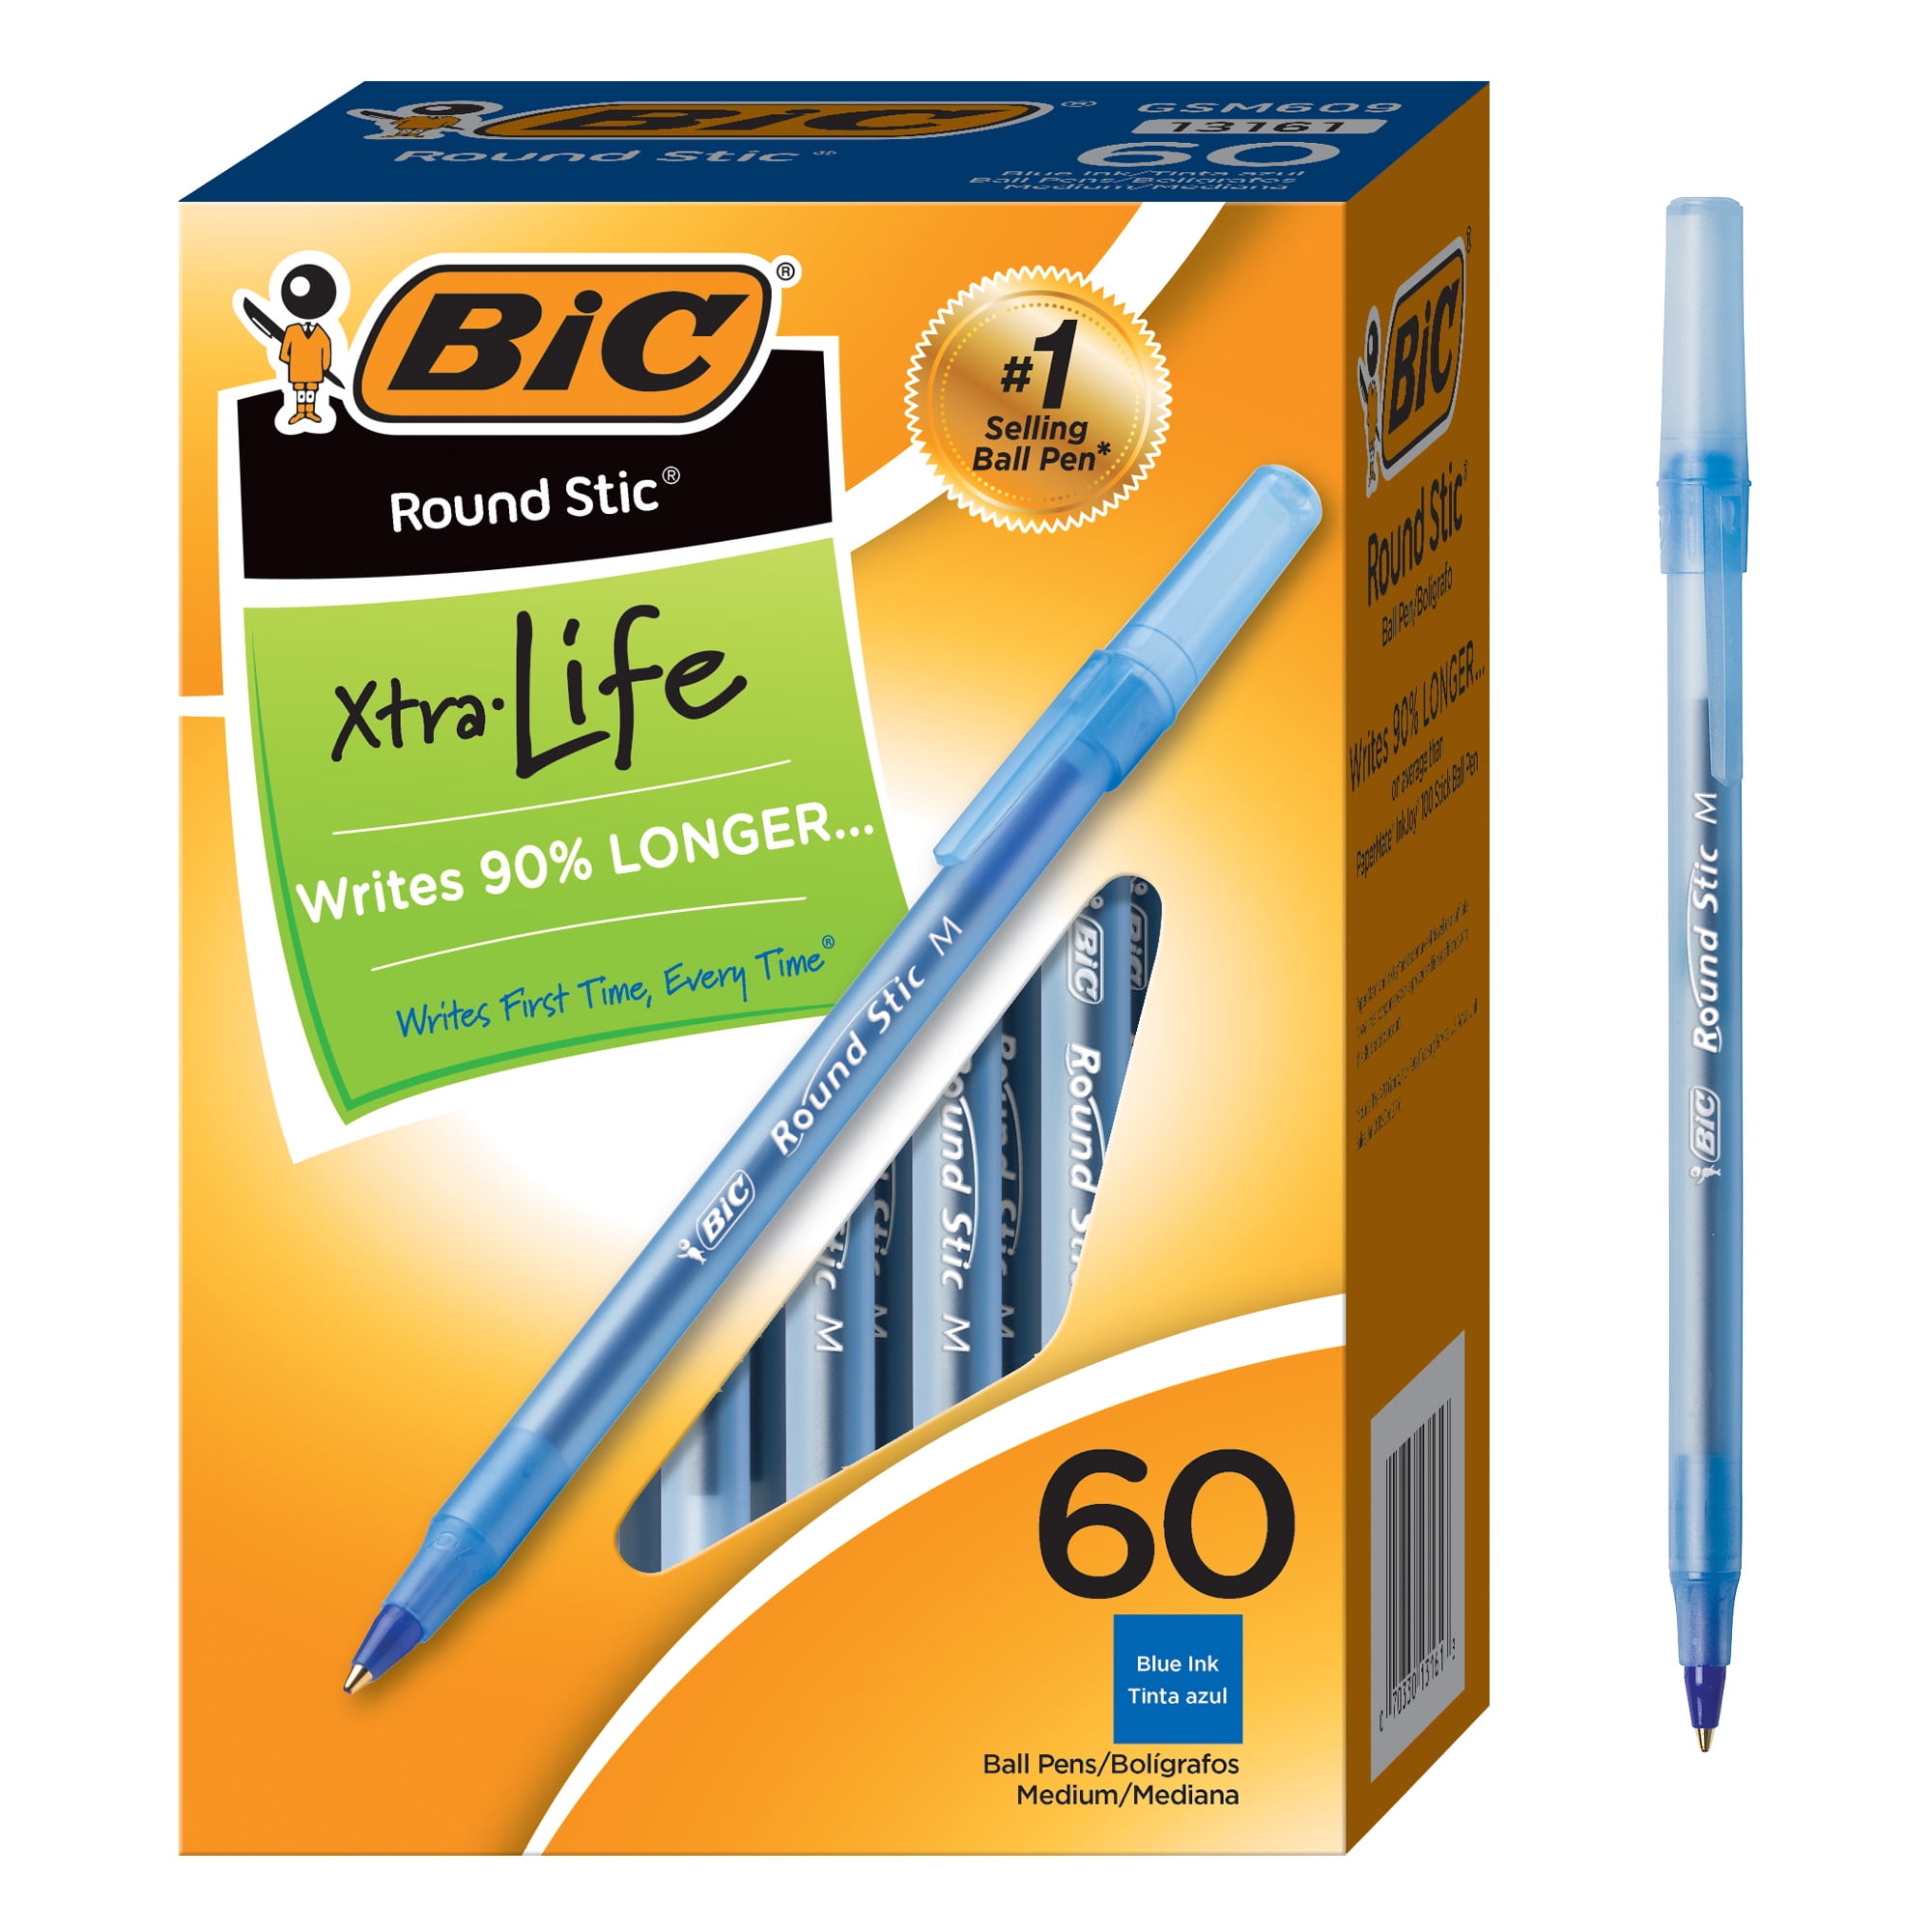 BLACK GENUINE Product 10 Pack of Bic Branded Round Stic Pens 